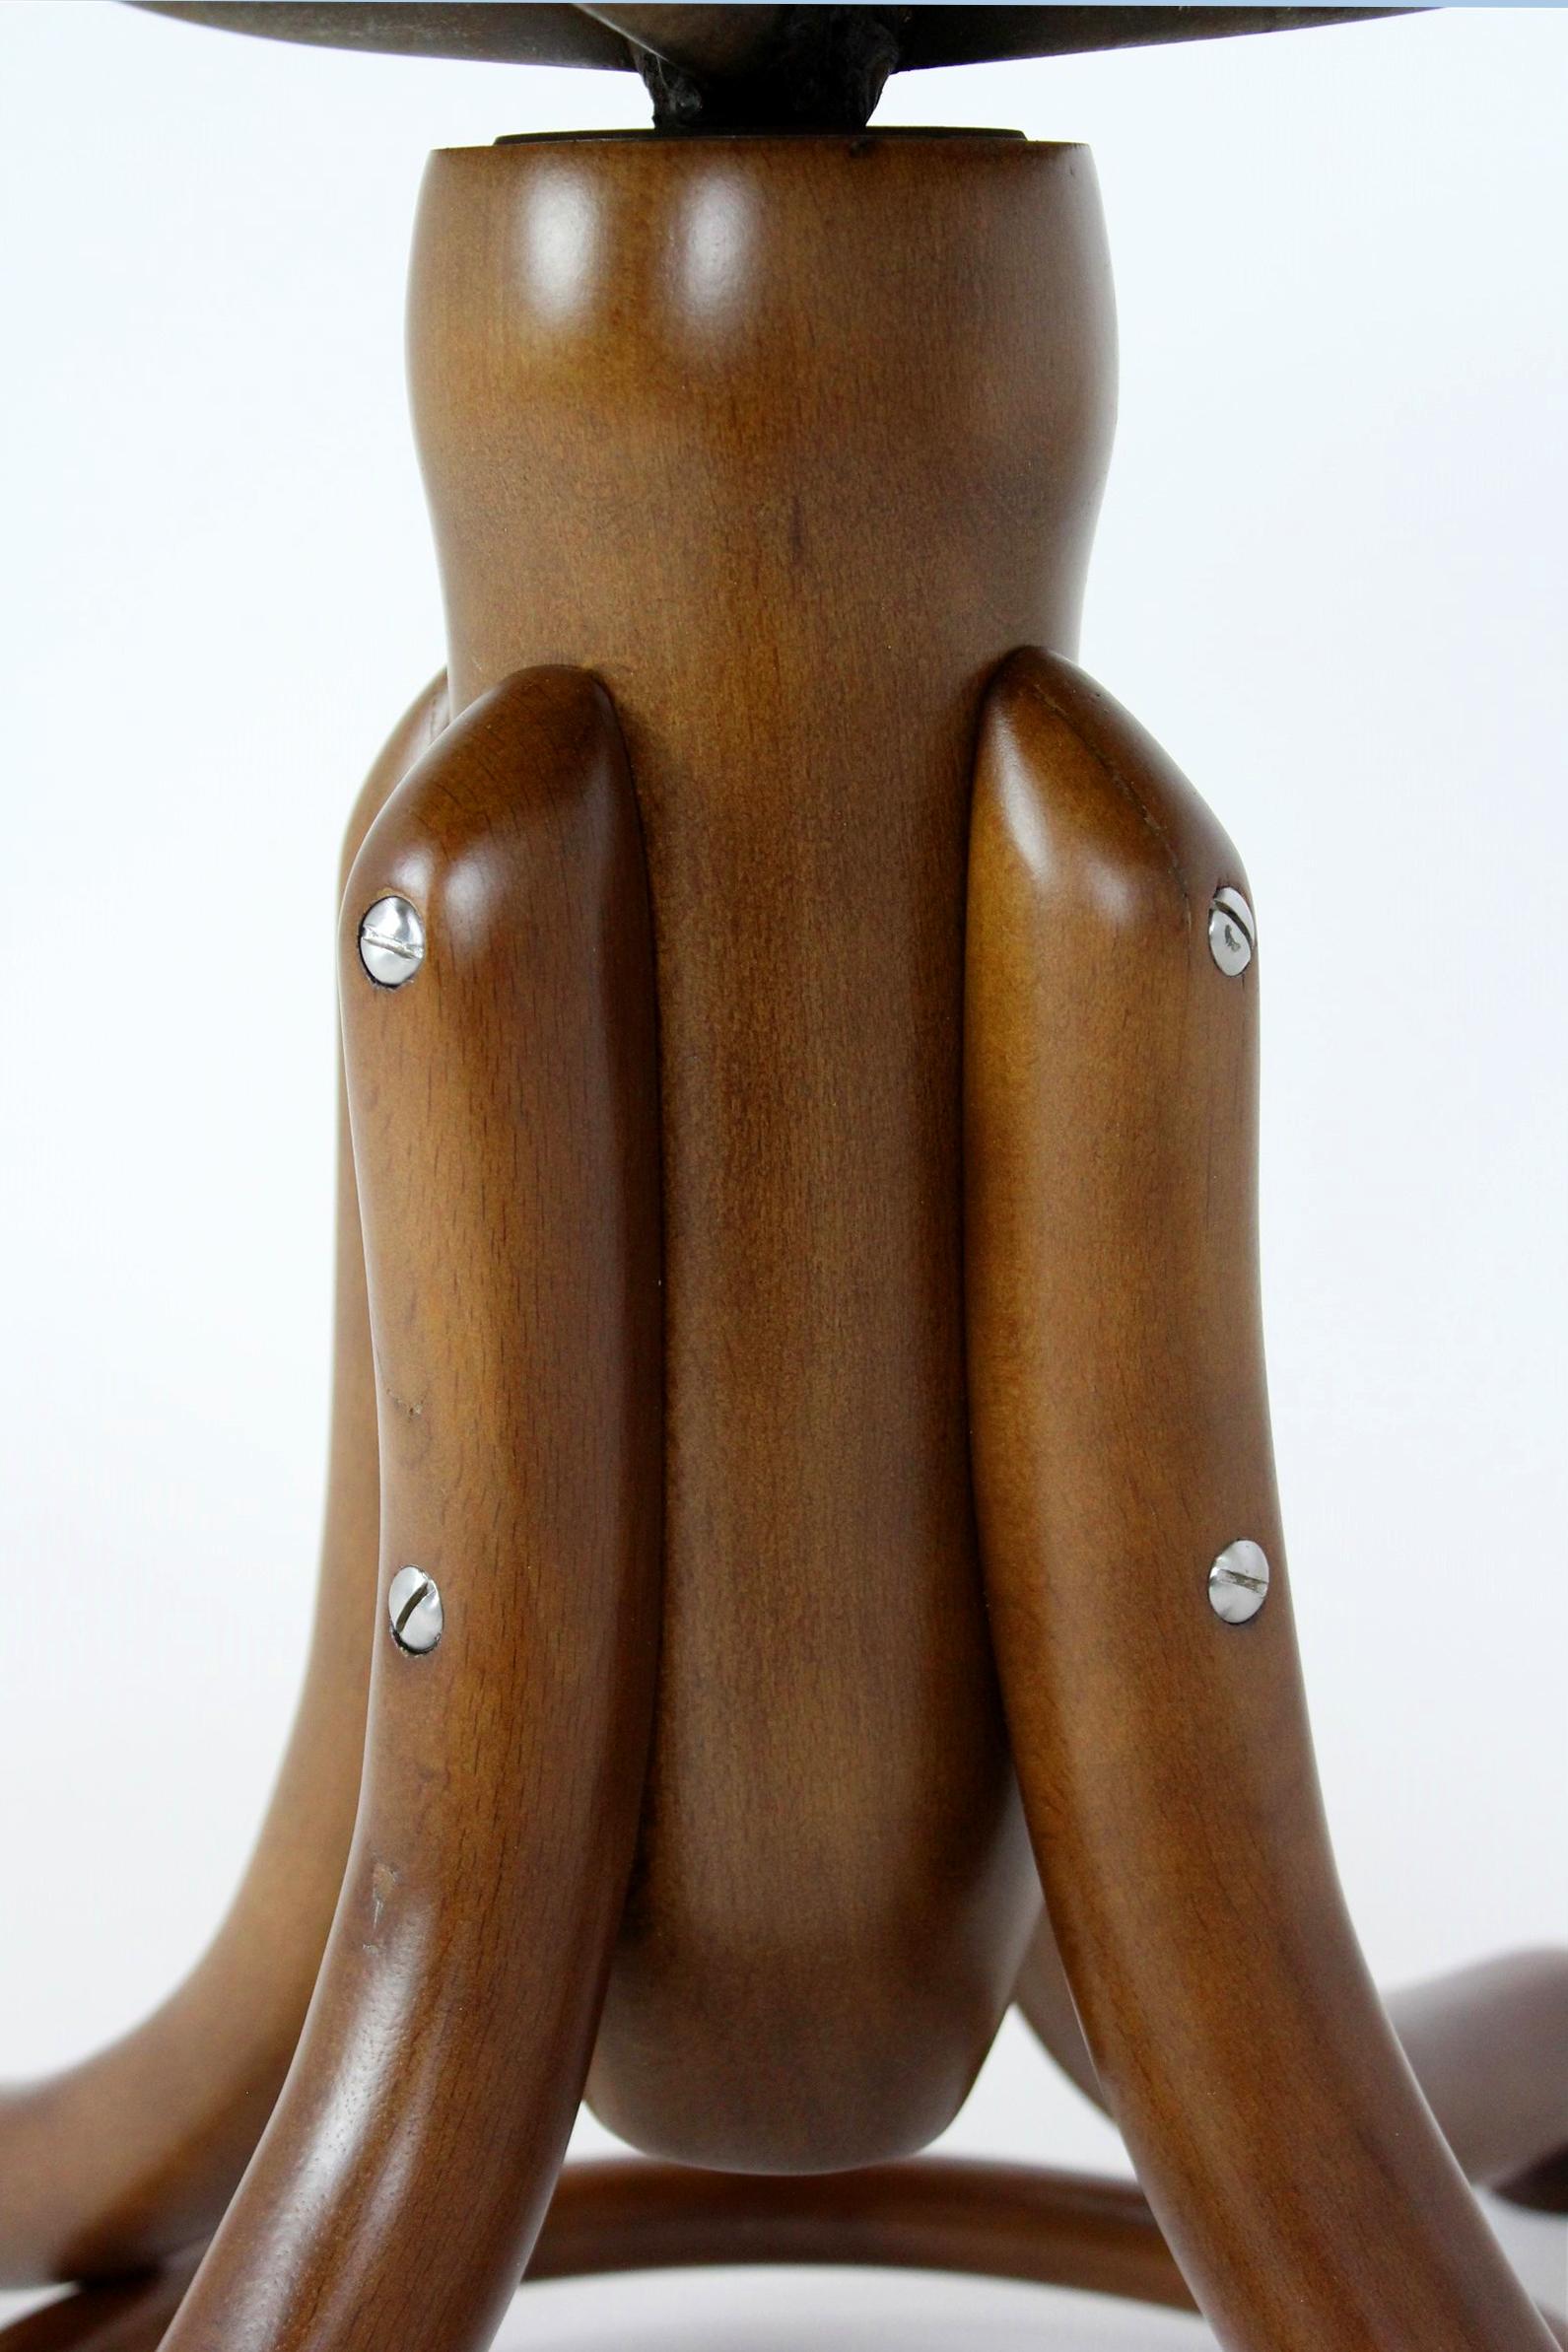 Beech Restored Thonet Style Bentwood Piano Stool, 1940s For Sale